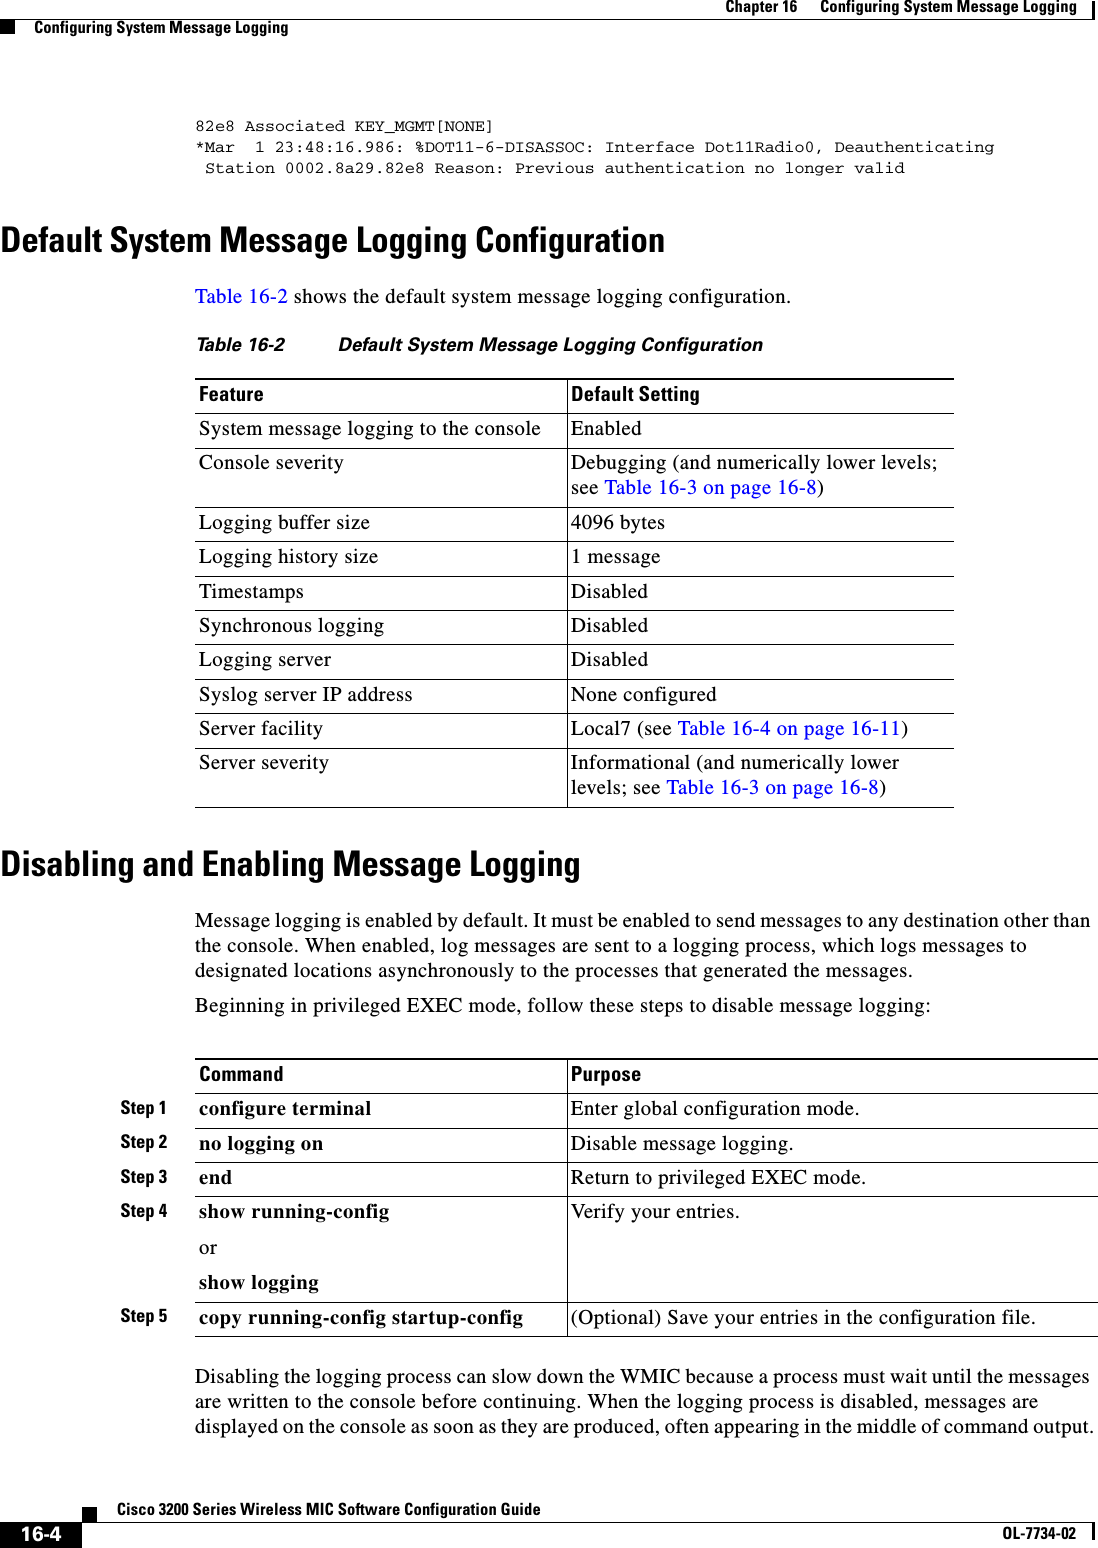 16-4Cisco 3200 Series Wireless MIC Software Configuration GuideOL-7734-02Chapter 16      Configuring System Message LoggingConfiguring System Message Logging82e8 Associated KEY_MGMT[NONE]*Mar  1 23:48:16.986: %DOT11-6-DISASSOC: Interface Dot11Radio0, Deauthenticating Station 0002.8a29.82e8 Reason: Previous authentication no longer validDefault System Message Logging ConfigurationTable 16-2 shows the default system message logging configuration.Disabling and Enabling Message LoggingMessage logging is enabled by default. It must be enabled to send messages to any destination other than the console. When enabled, log messages are sent to a logging process, which logs messages to designated locations asynchronously to the processes that generated the messages.Beginning in privileged EXEC mode, follow these steps to disable message logging:Disabling the logging process can slow down the WMIC because a process must wait until the messages are written to the console before continuing. When the logging process is disabled, messages are displayed on the console as soon as they are produced, often appearing in the middle of command output.Table 16-2 Default System Message Logging ConfigurationFeature Default SettingSystem message logging to the console EnabledConsole severity Debugging (and numerically lower levels; see Table 16-3 on page 16-8)Logging buffer size 4096 bytesLogging history size 1 messageTimestamps DisabledSynchronous logging DisabledLogging server DisabledSyslog server IP address None configuredServer facility Local7 (see Table 16-4 on page 16-11)Server severity Informational (and numerically lower levels; see Table 16-3 on page 16-8)Command PurposeStep 1 configure terminal Enter global configuration mode.Step 2 no logging on Disable message logging.Step 3 end Return to privileged EXEC mode.Step 4 show running-configorshow loggingVerify your entries.Step 5 copy running-config startup-config (Optional) Save your entries in the configuration file.